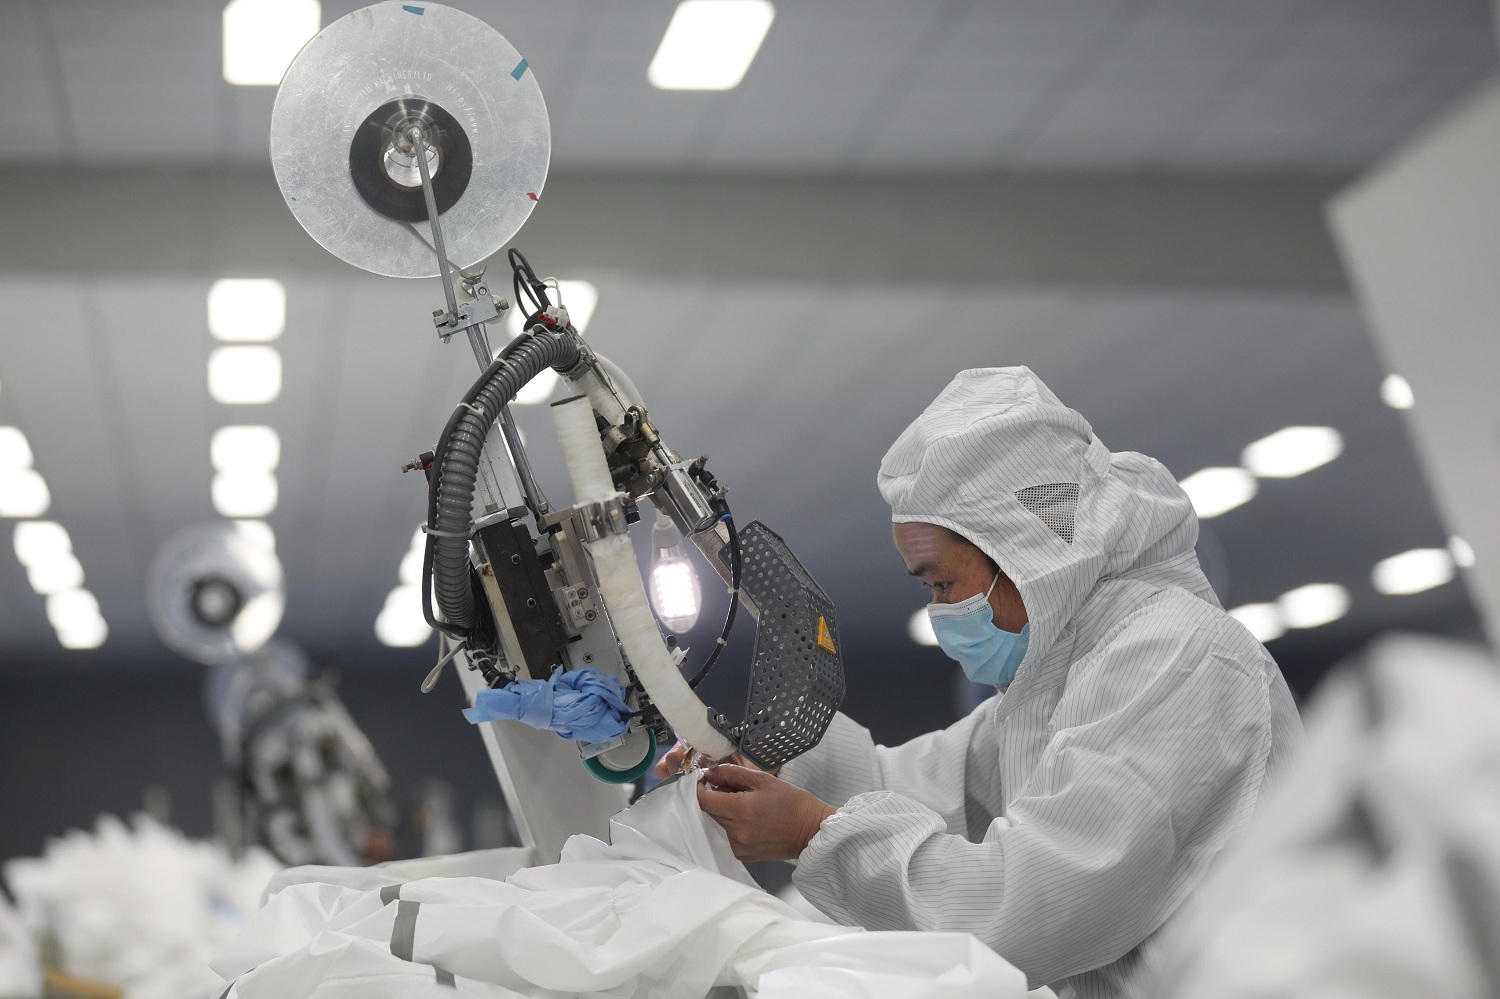 An employee works on a production line manufacturing protective suits at a medical supply factory in Wuhan